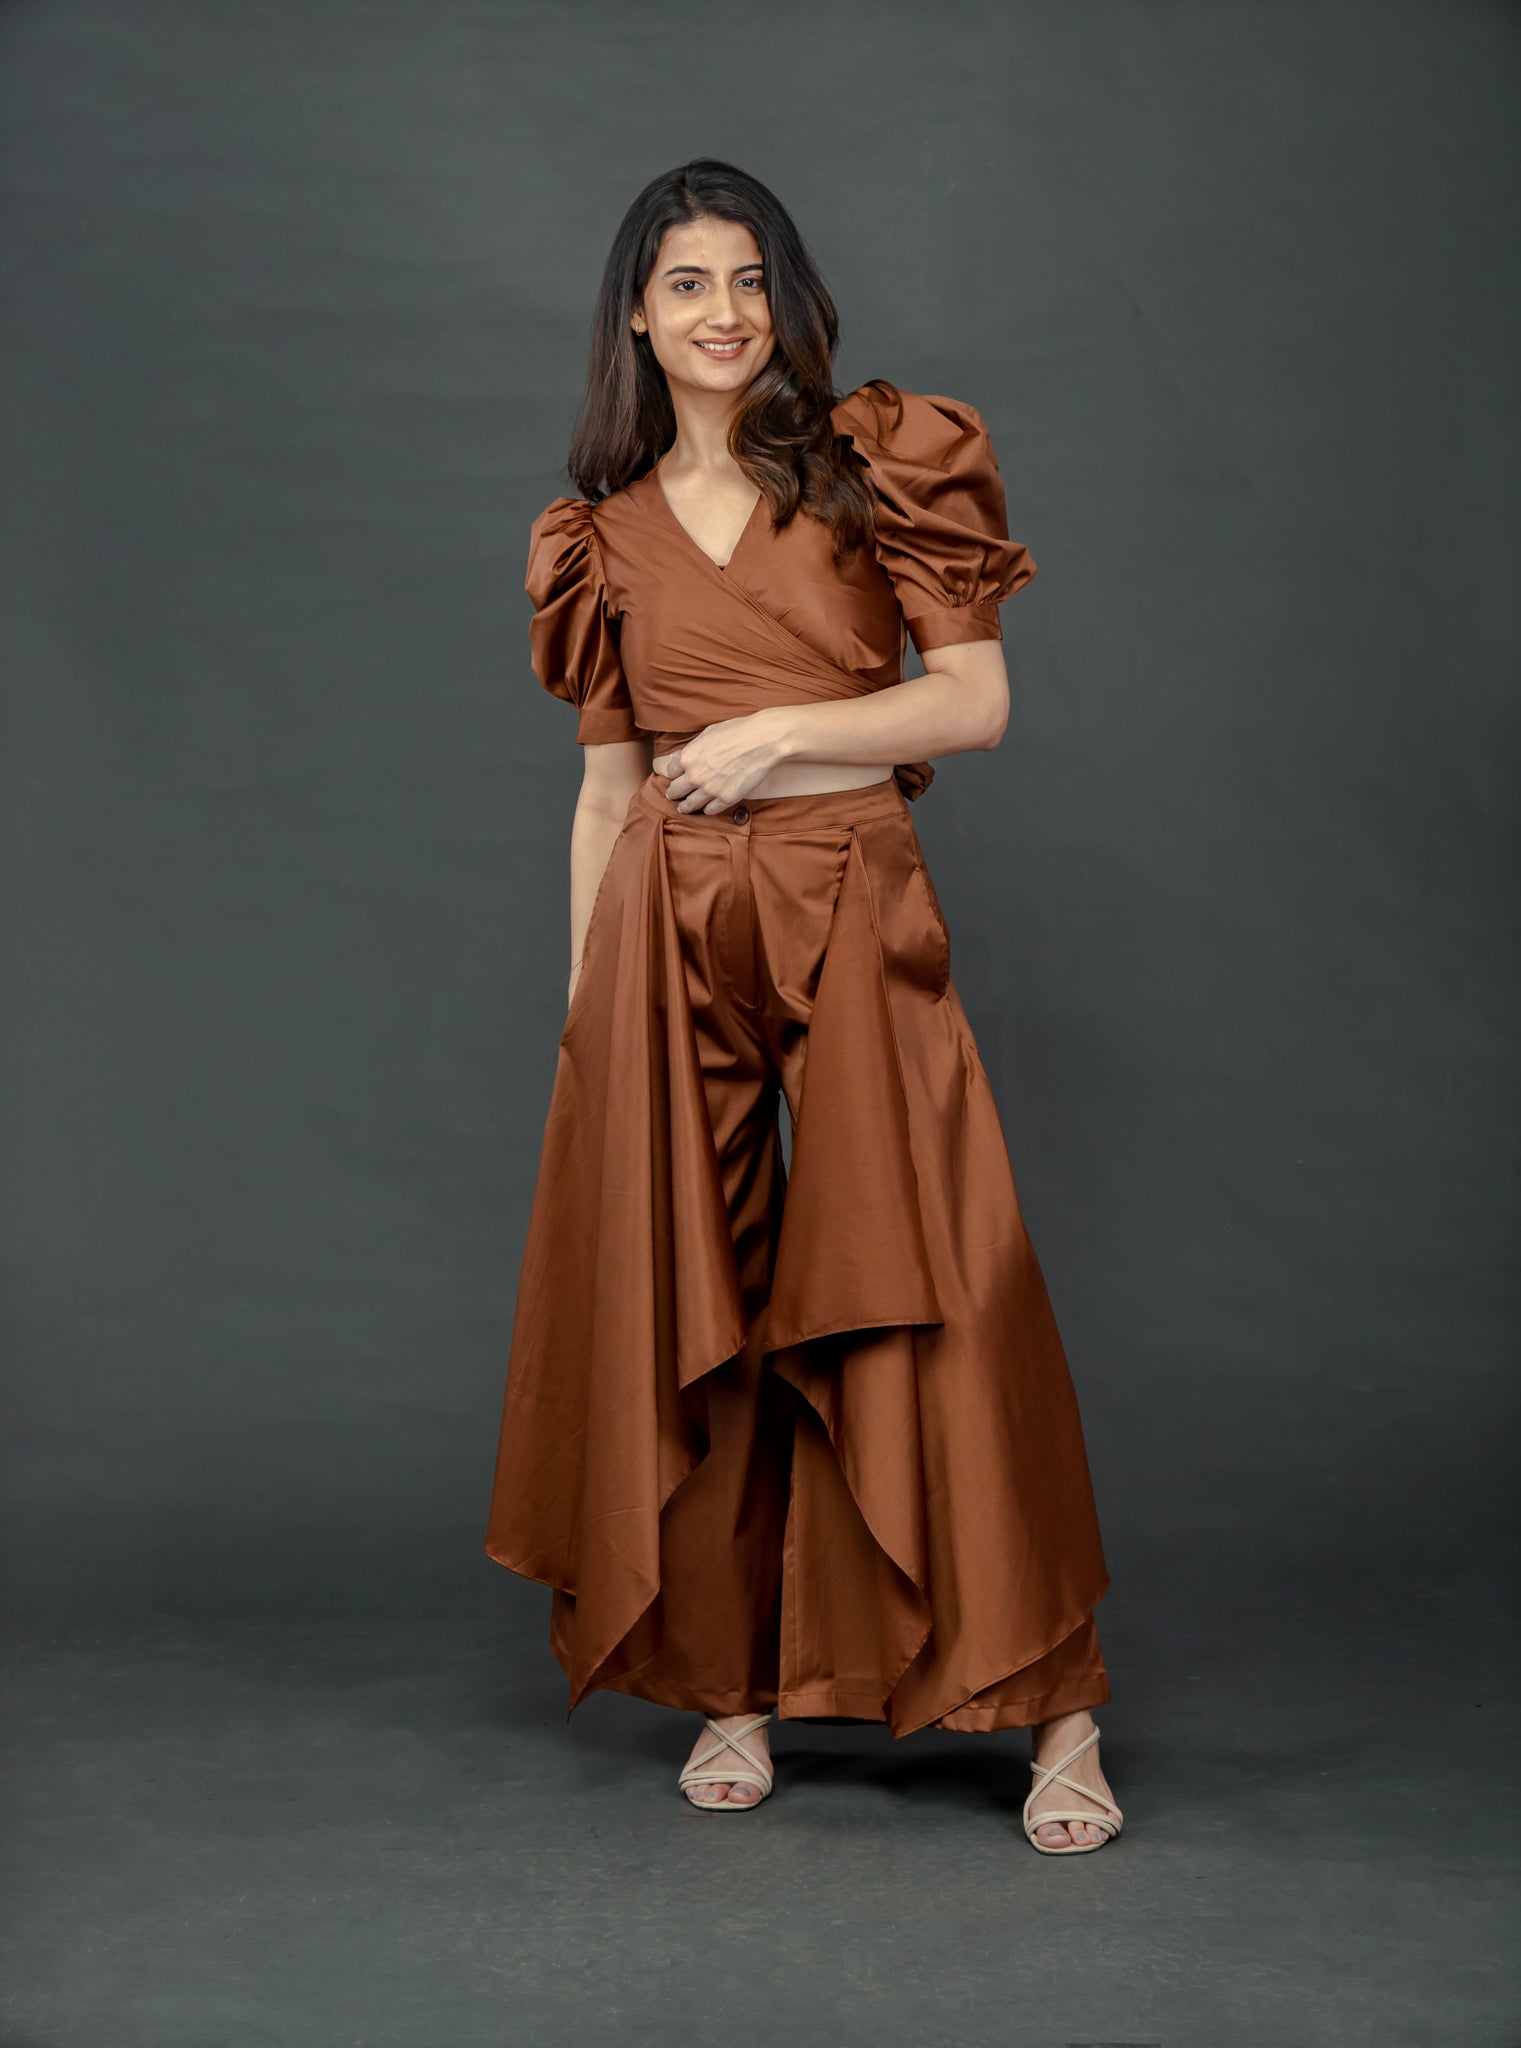 CHOCOLATE BROWN PUFFED SLEEVES TOP WITH TIE UP DETAIL PAIRED WITH FLARED PANTS